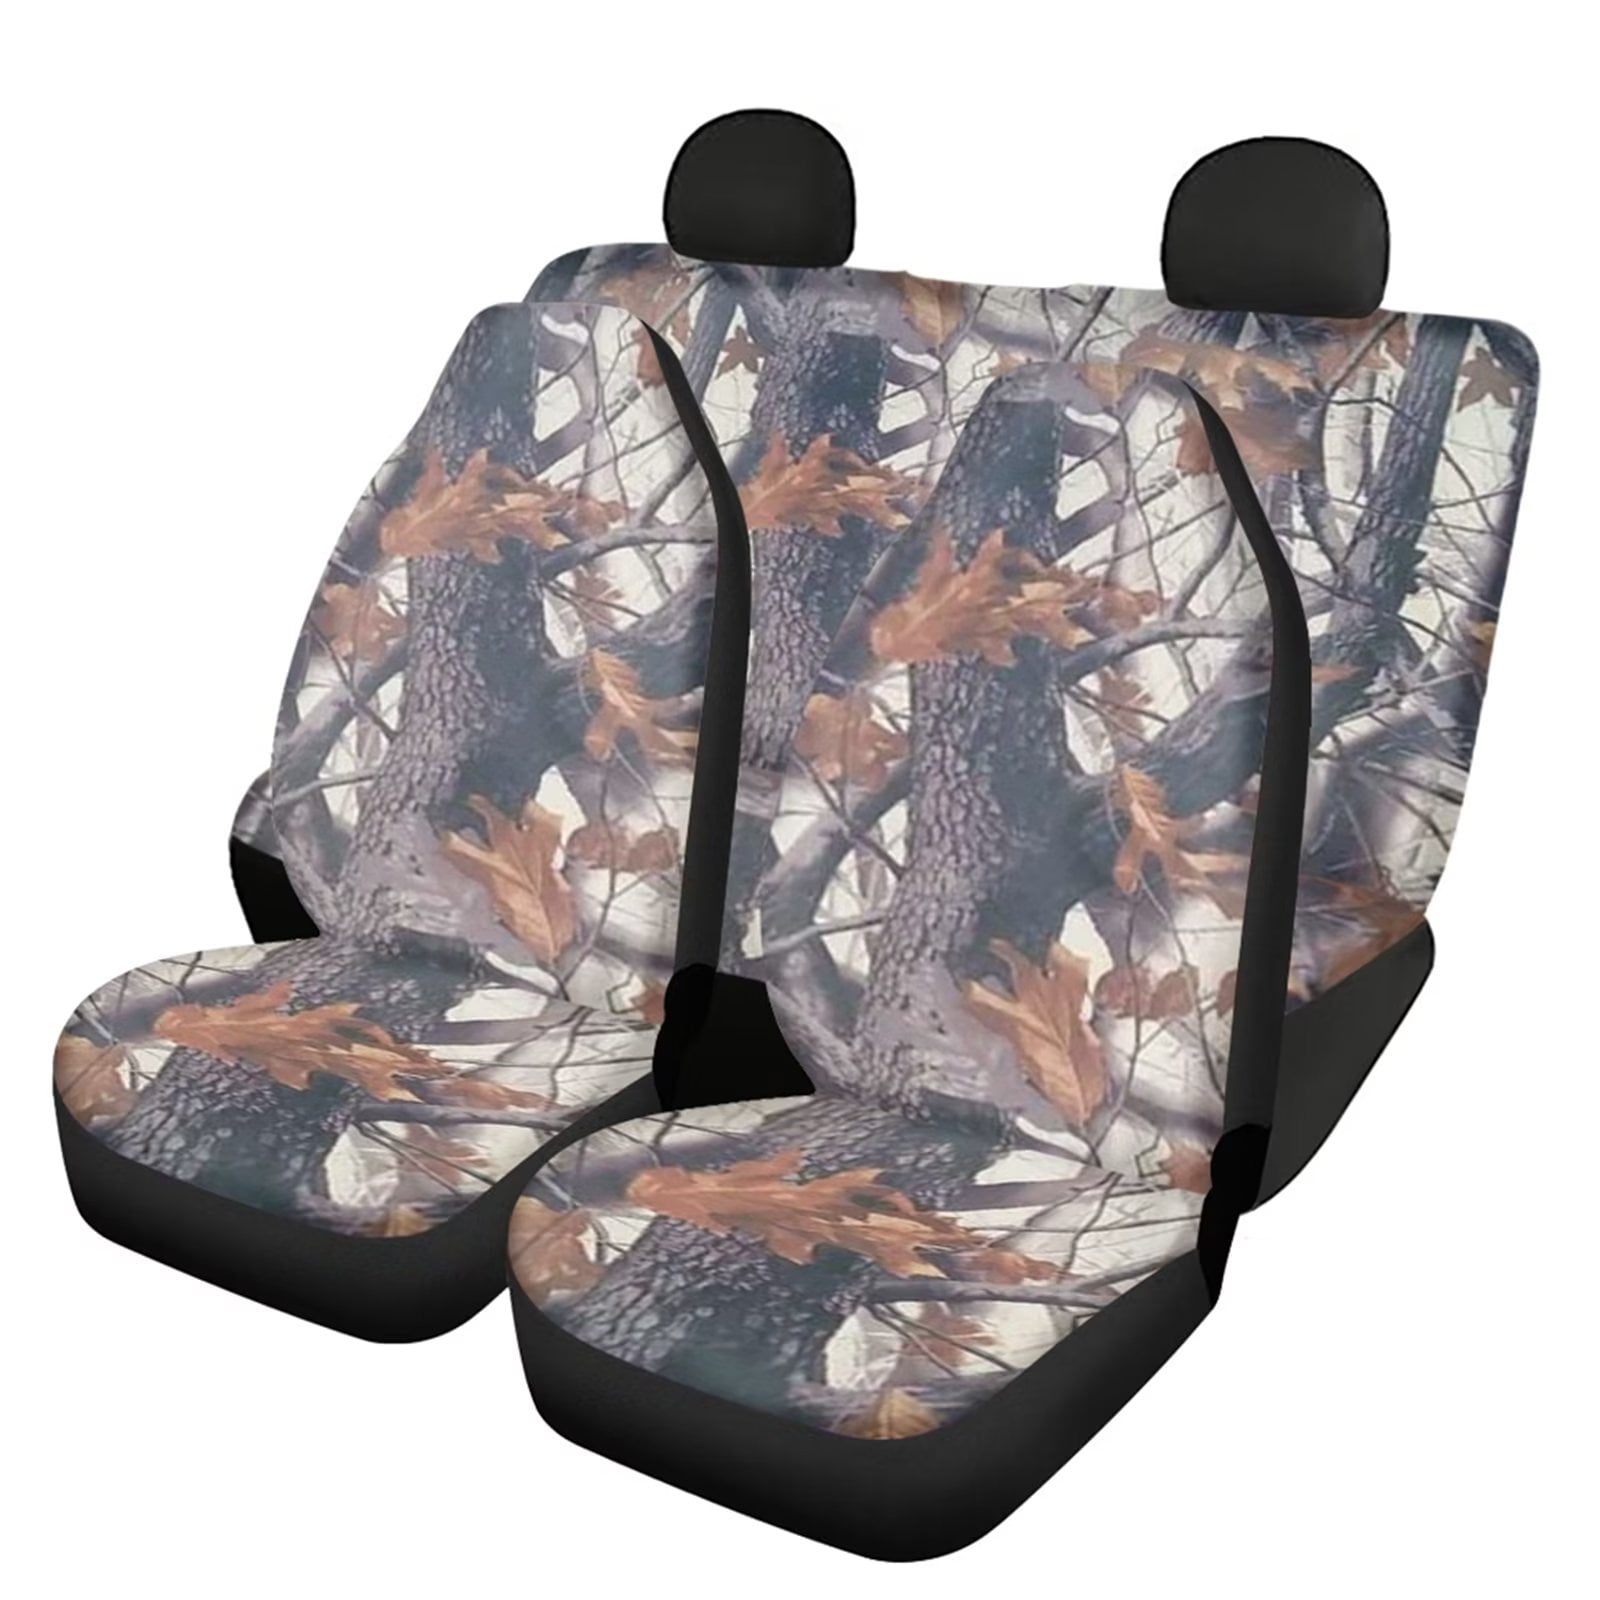 FKELYI 4 PCS American Flag Car Seat Covers Women Men Full Set Hunting Wood  Deer Skull Universal Fit Car Seat Cover for Cars SUV Trucks Rear Seat Cover  Split Bench,All Seasons Use 